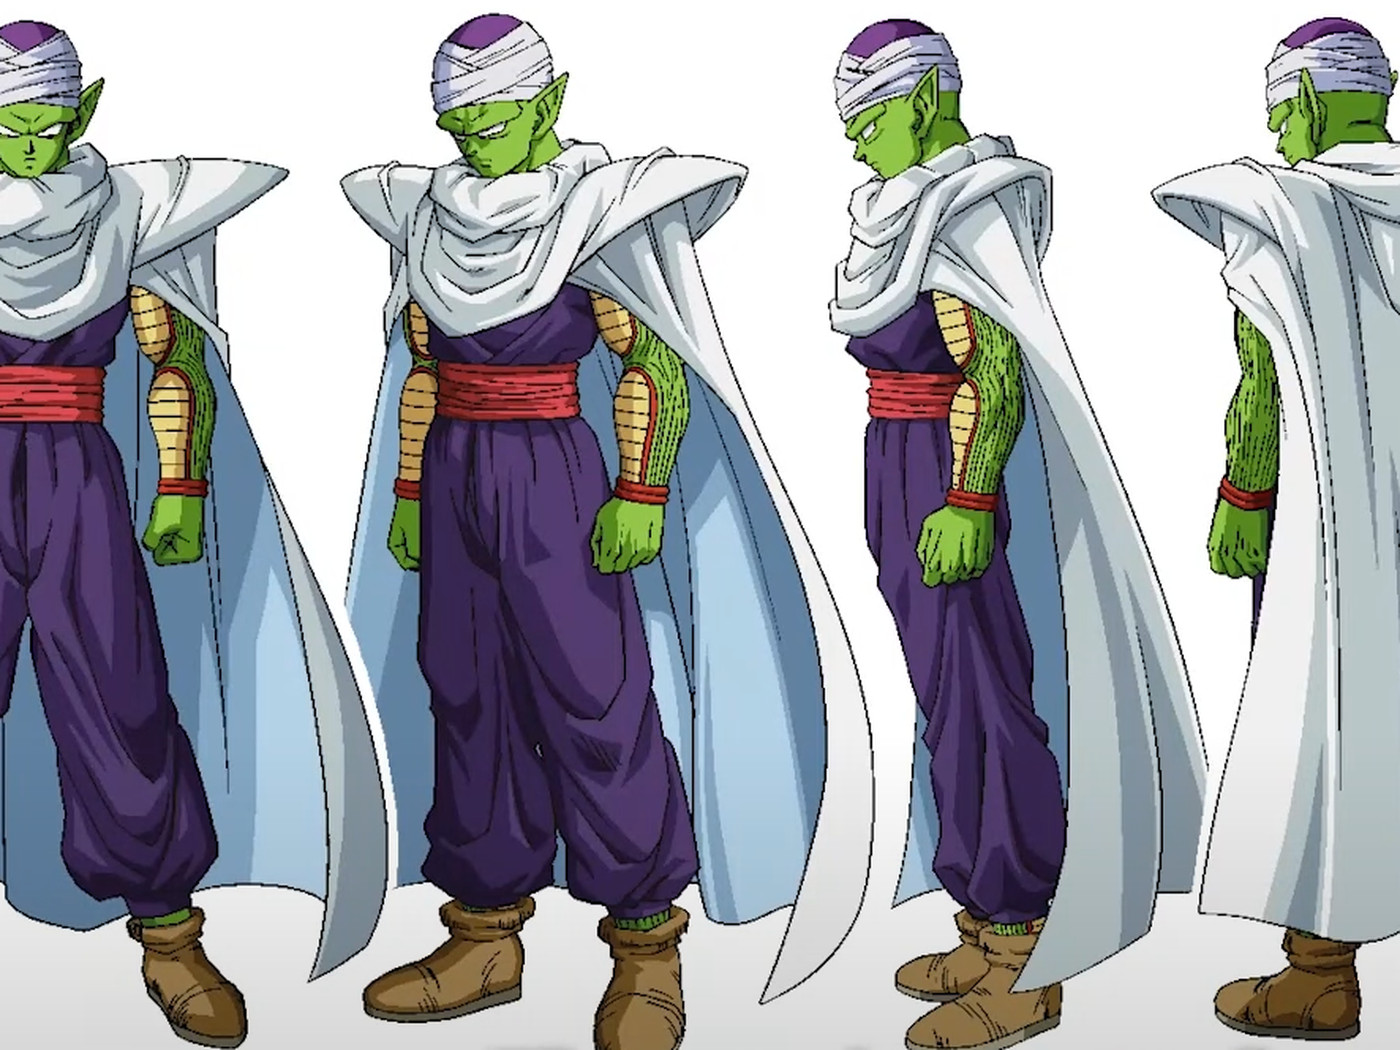 Dragon Ball Super: Super Hero character concepts revealed at SDCC 2021